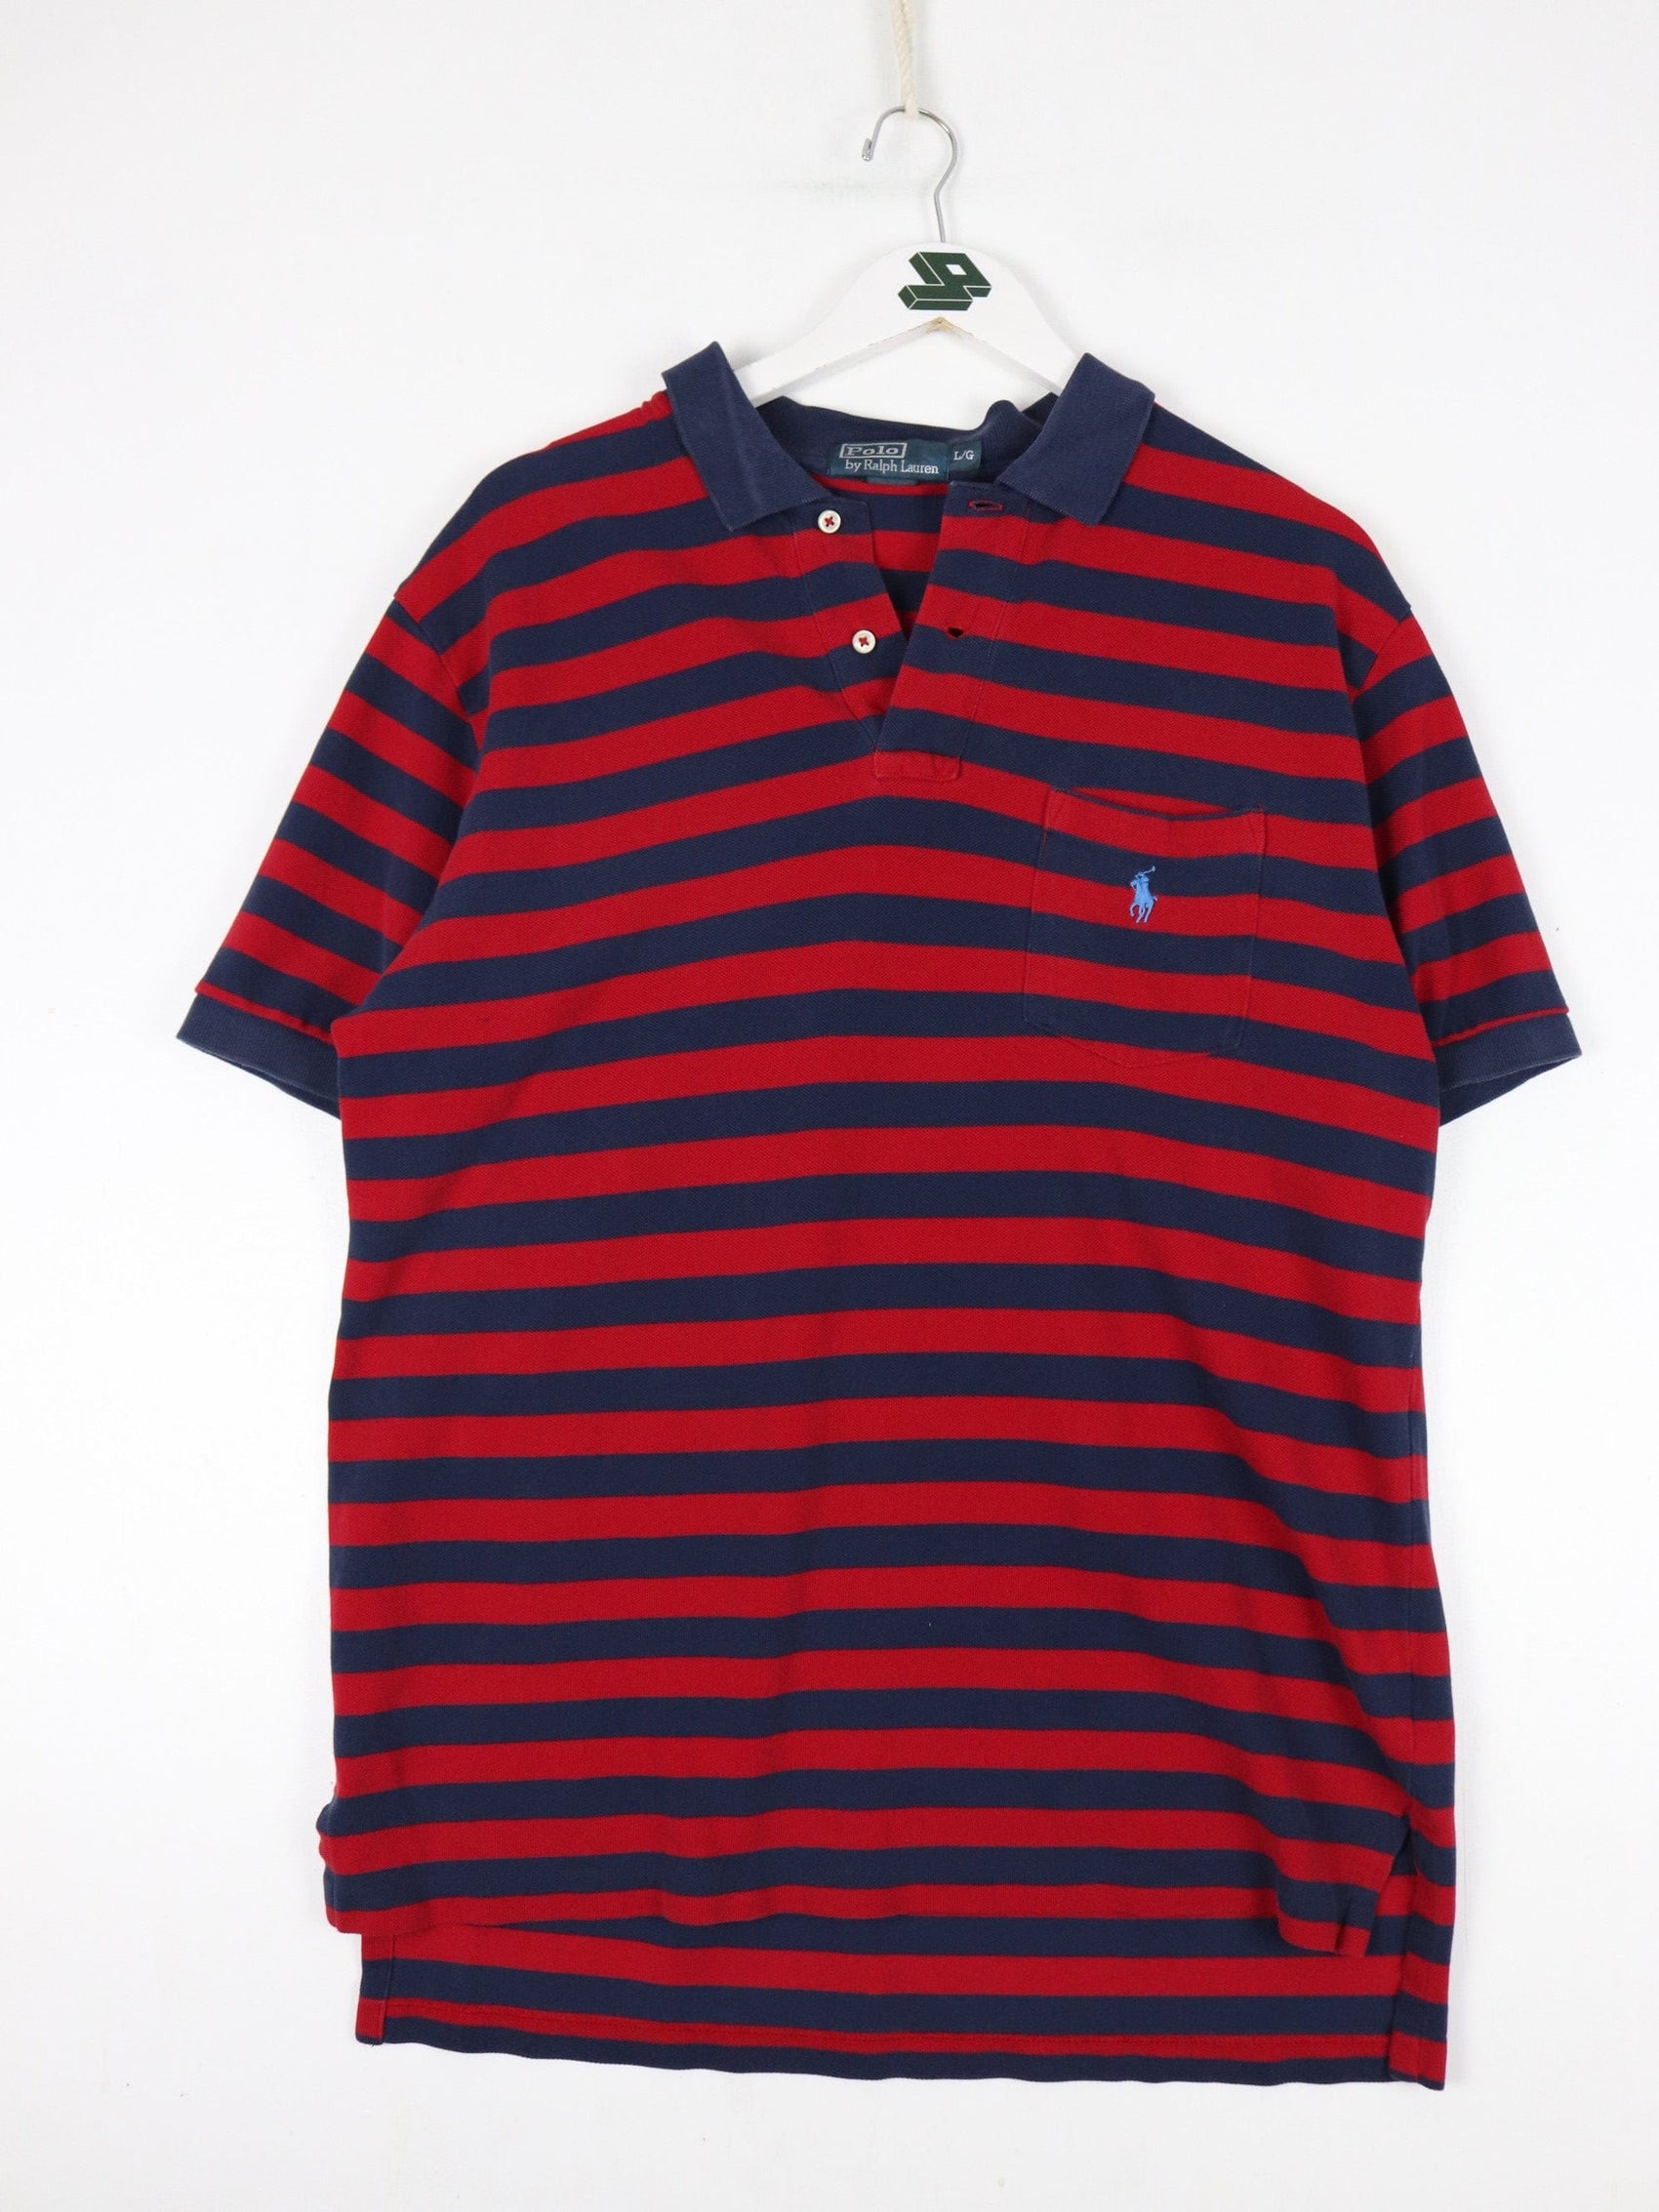 Polo Button Up Shirts Vintage Ralph Lauren Polo Shirt Mens Large Red Blue Striped